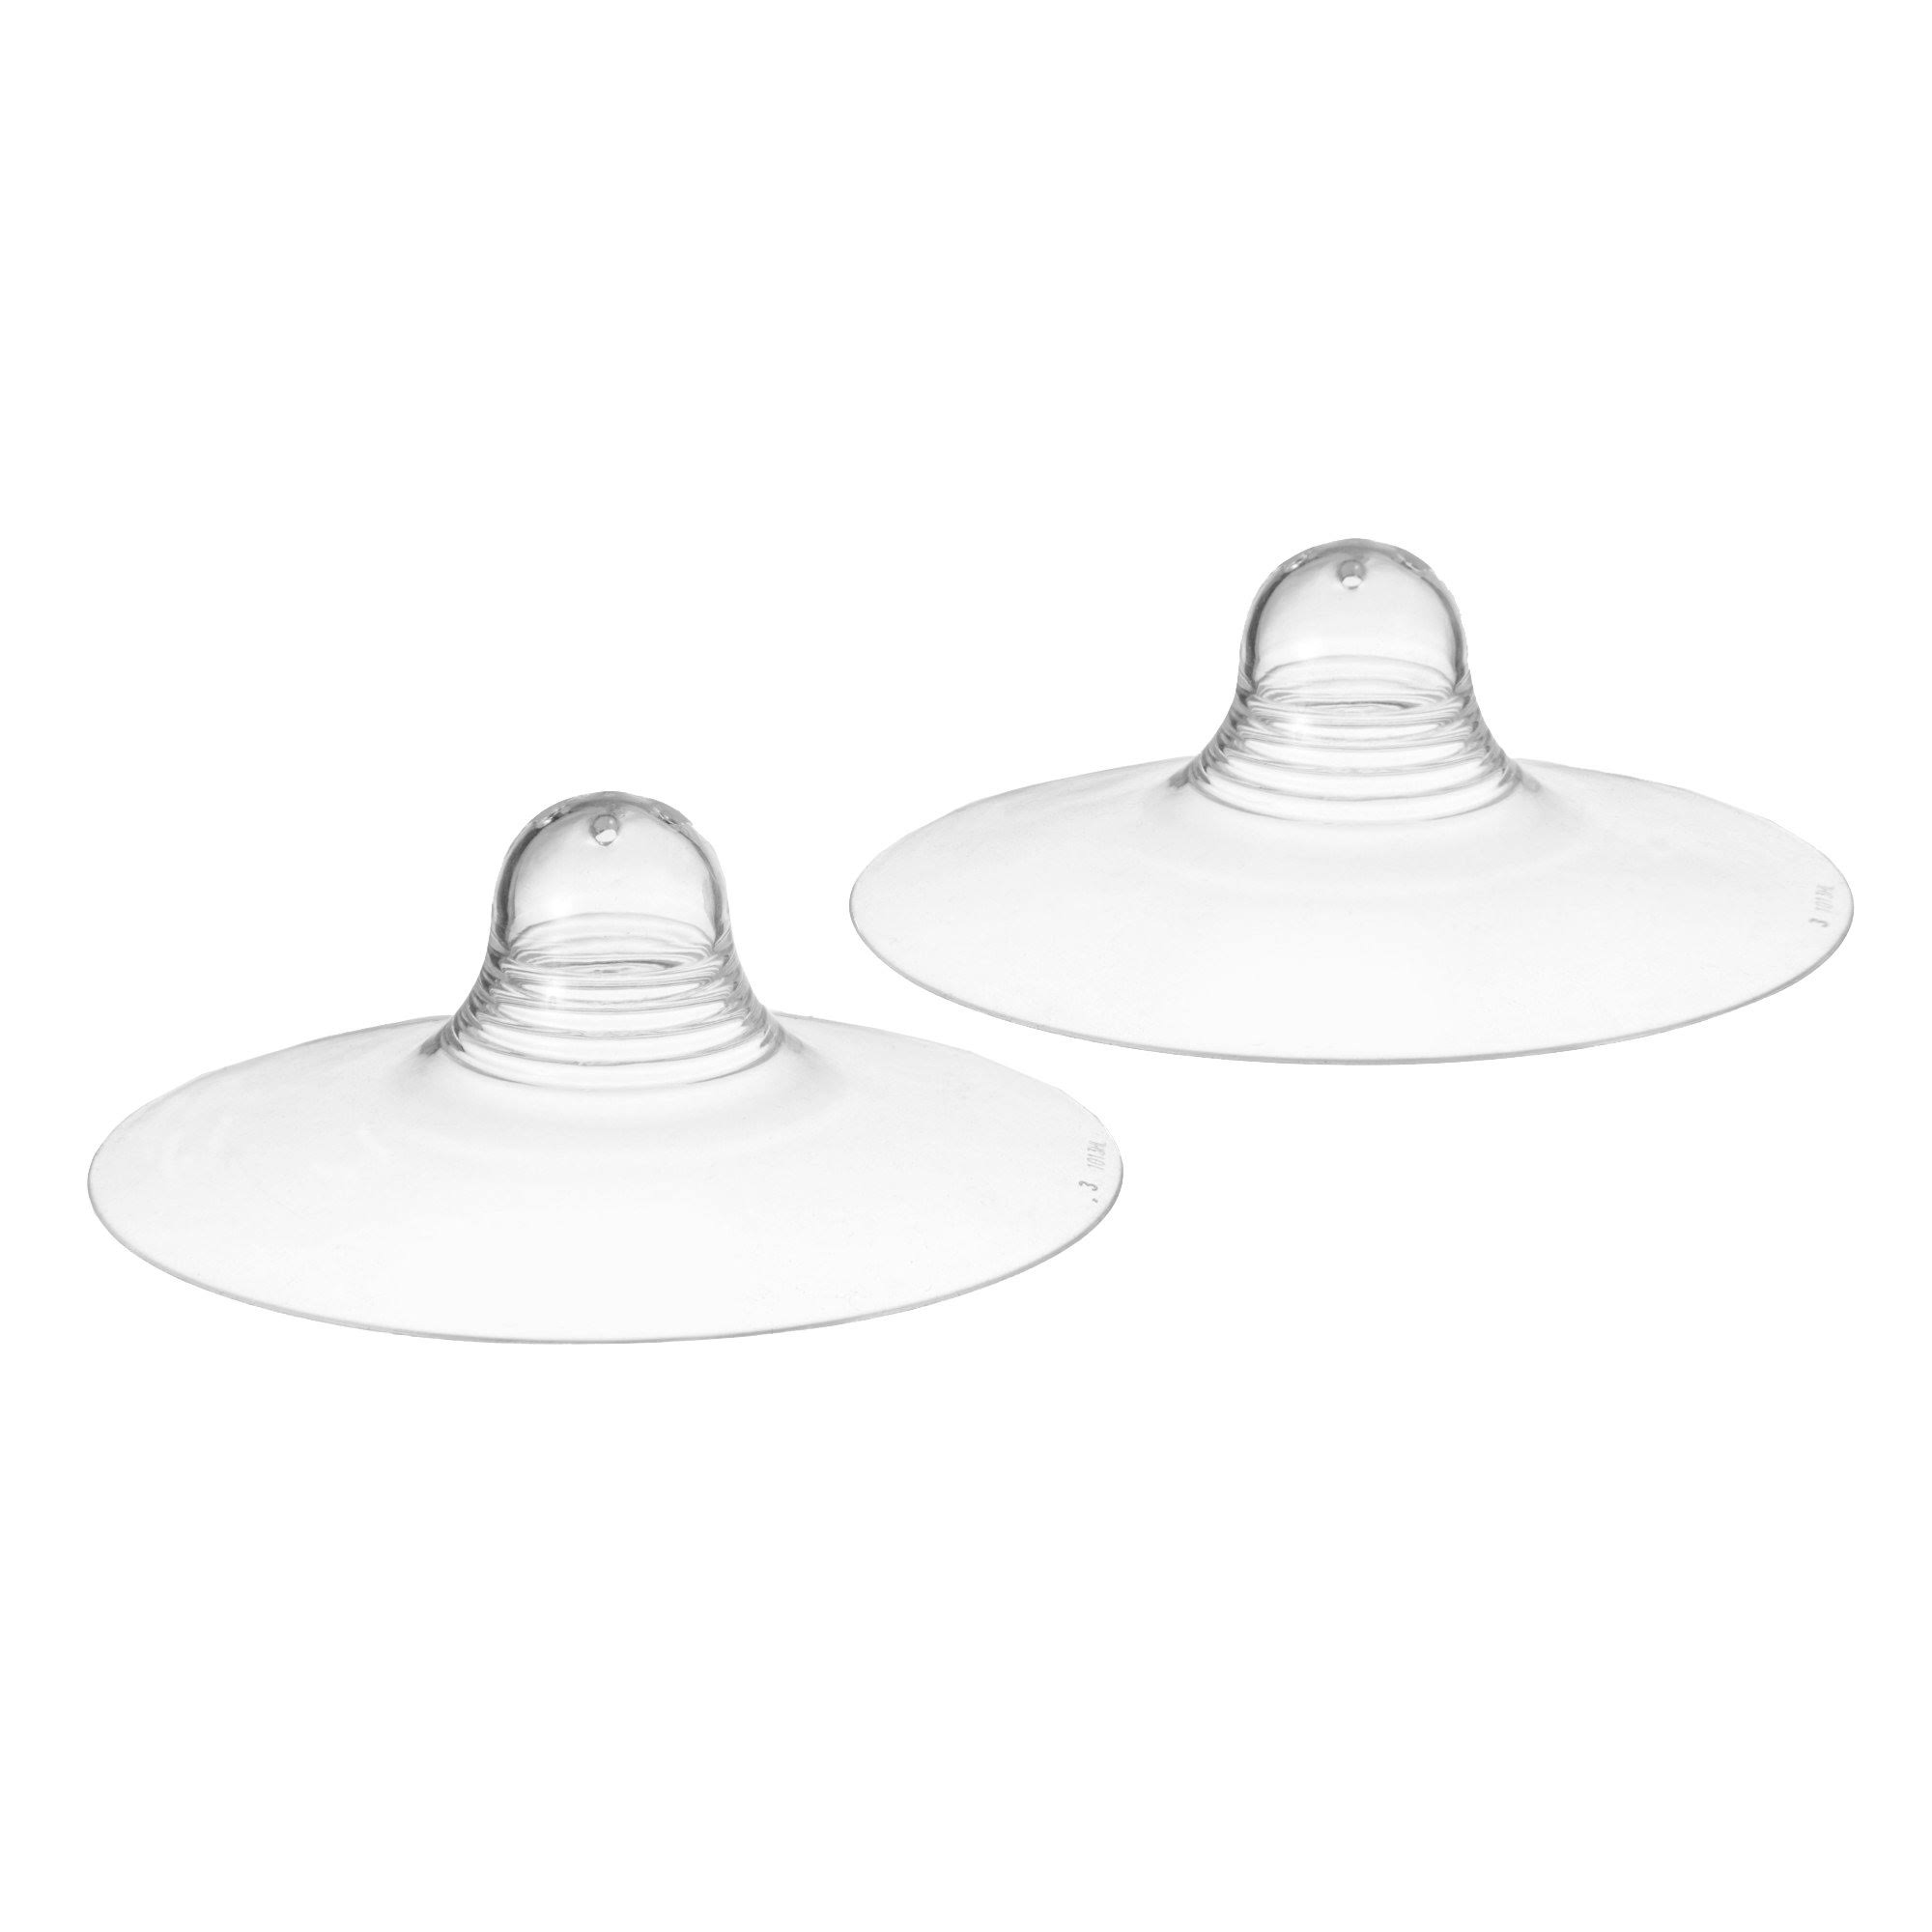 Tommee Tippee Nipple Shields - Clear, 2ct